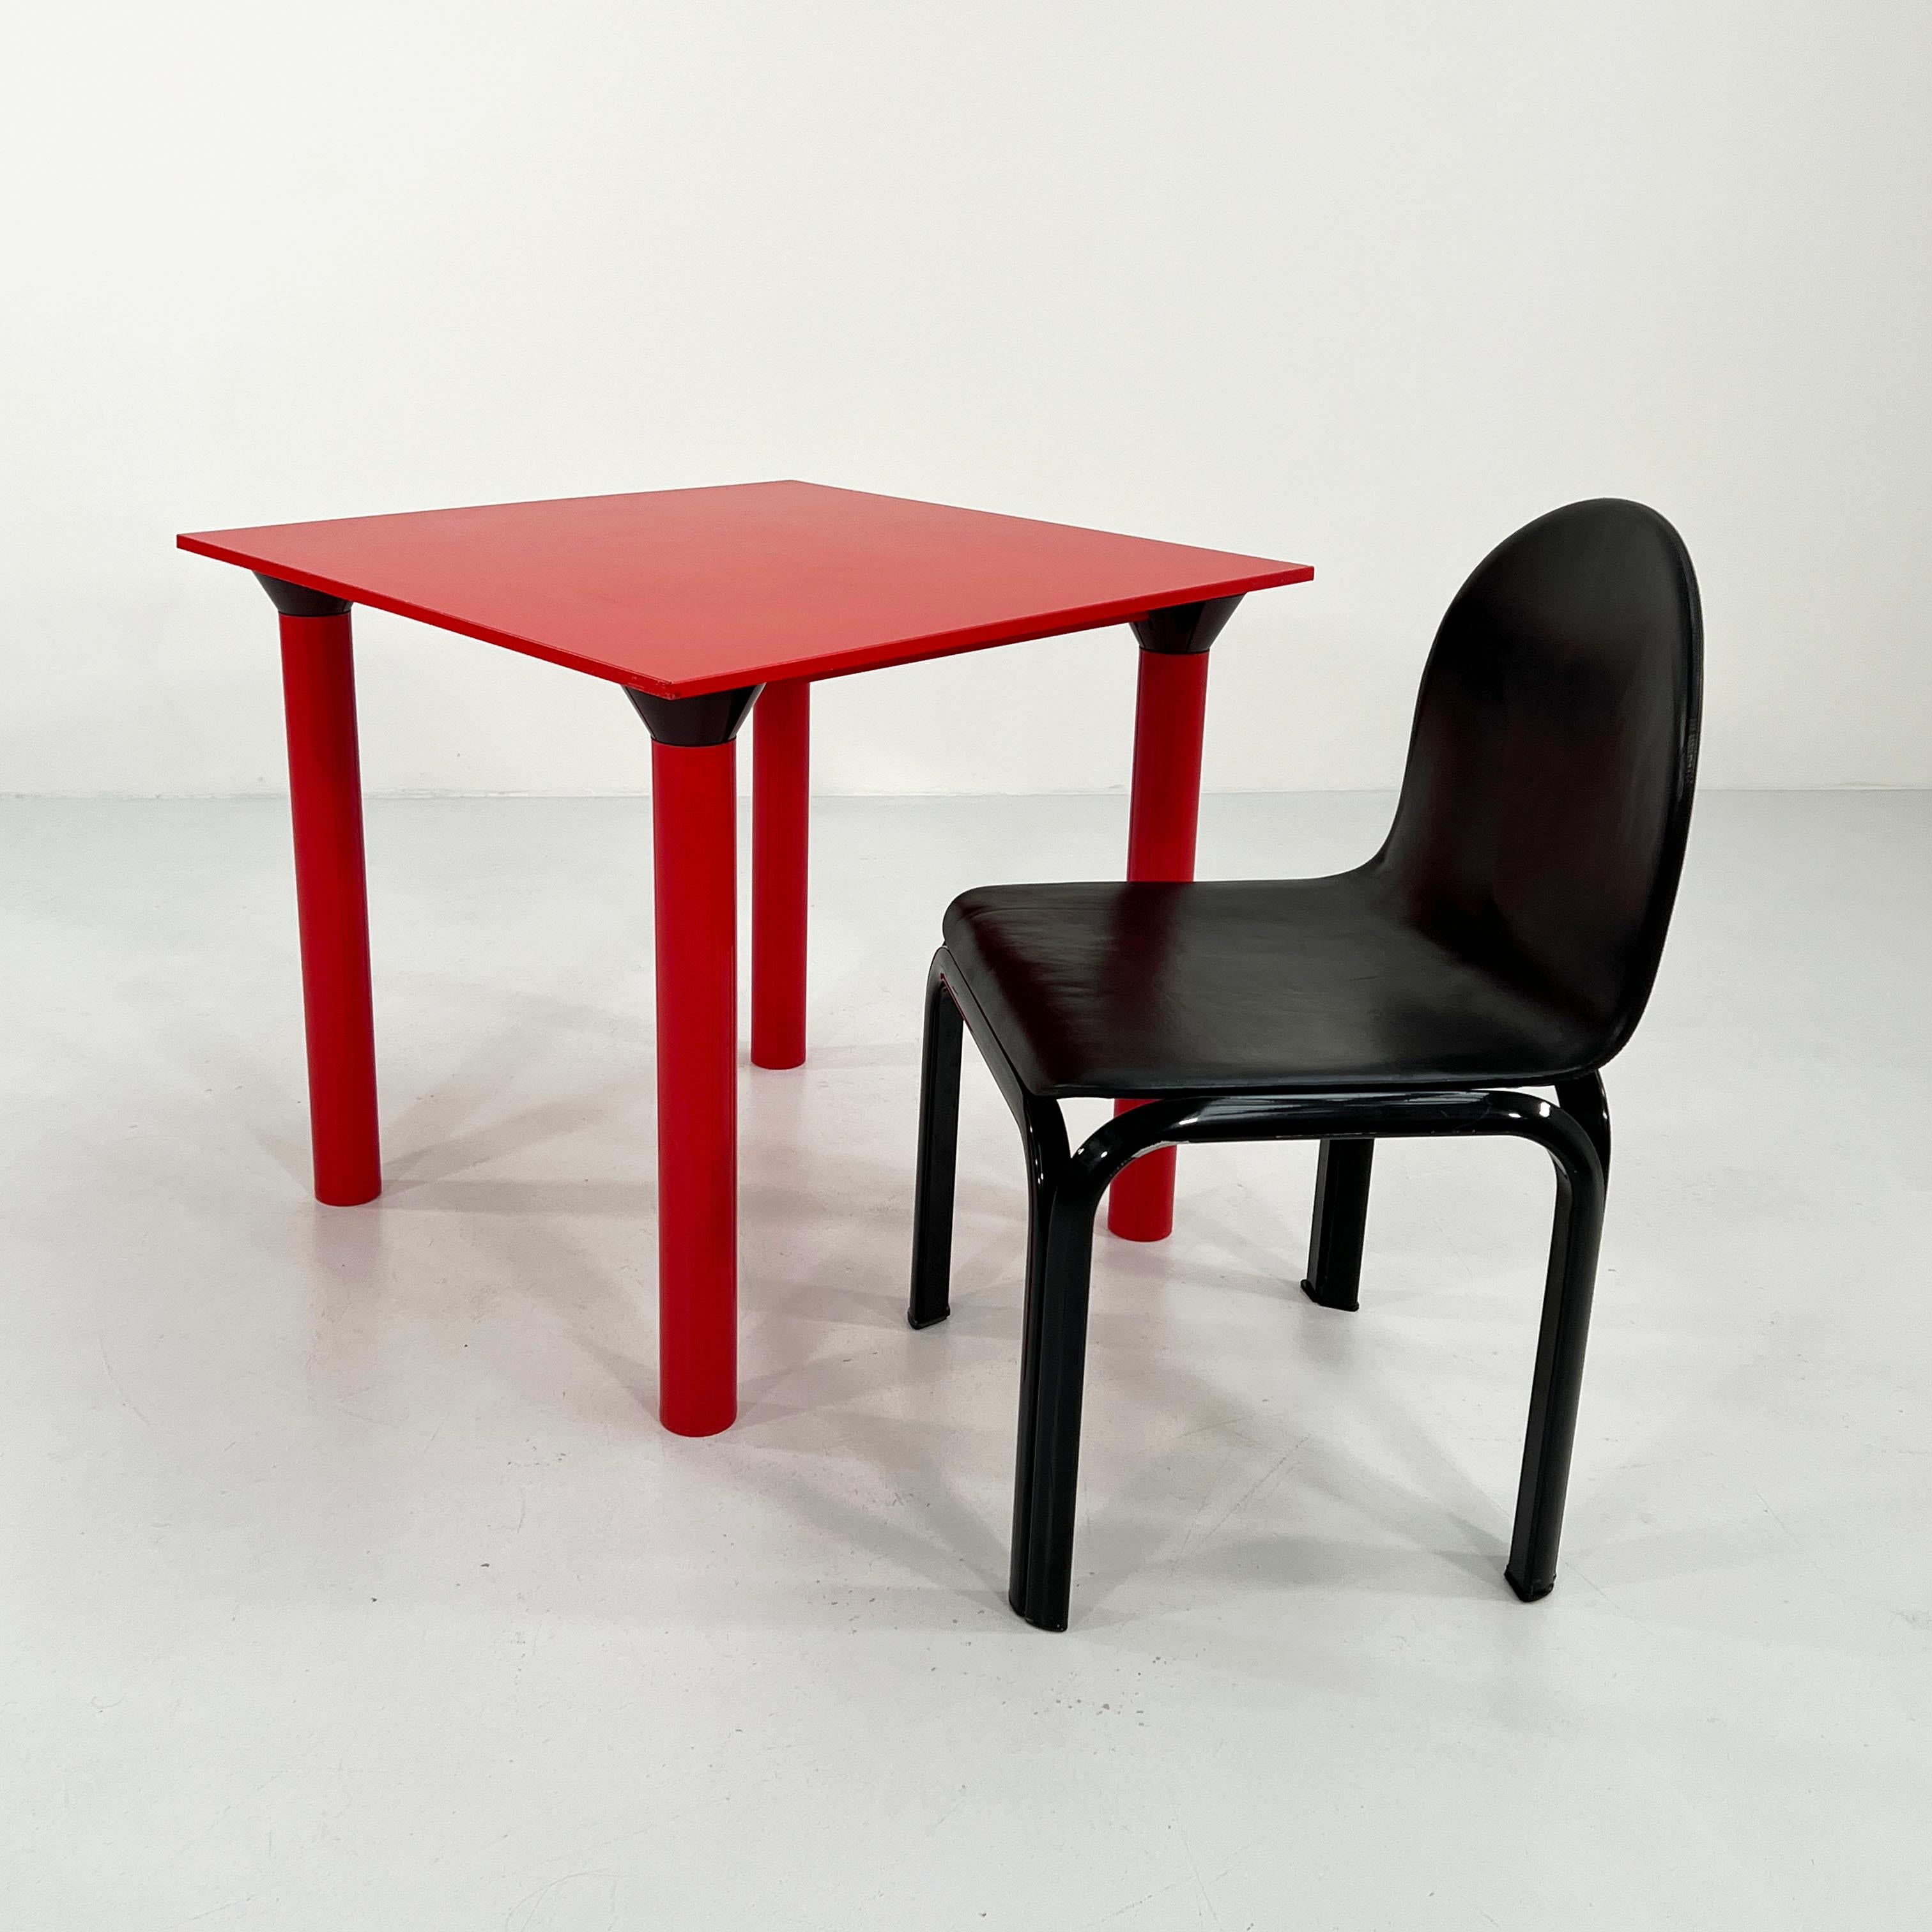 Plastic Red Dining Table Model 4300 by Anna Castelli Ferrieri for Kartell, 1970s